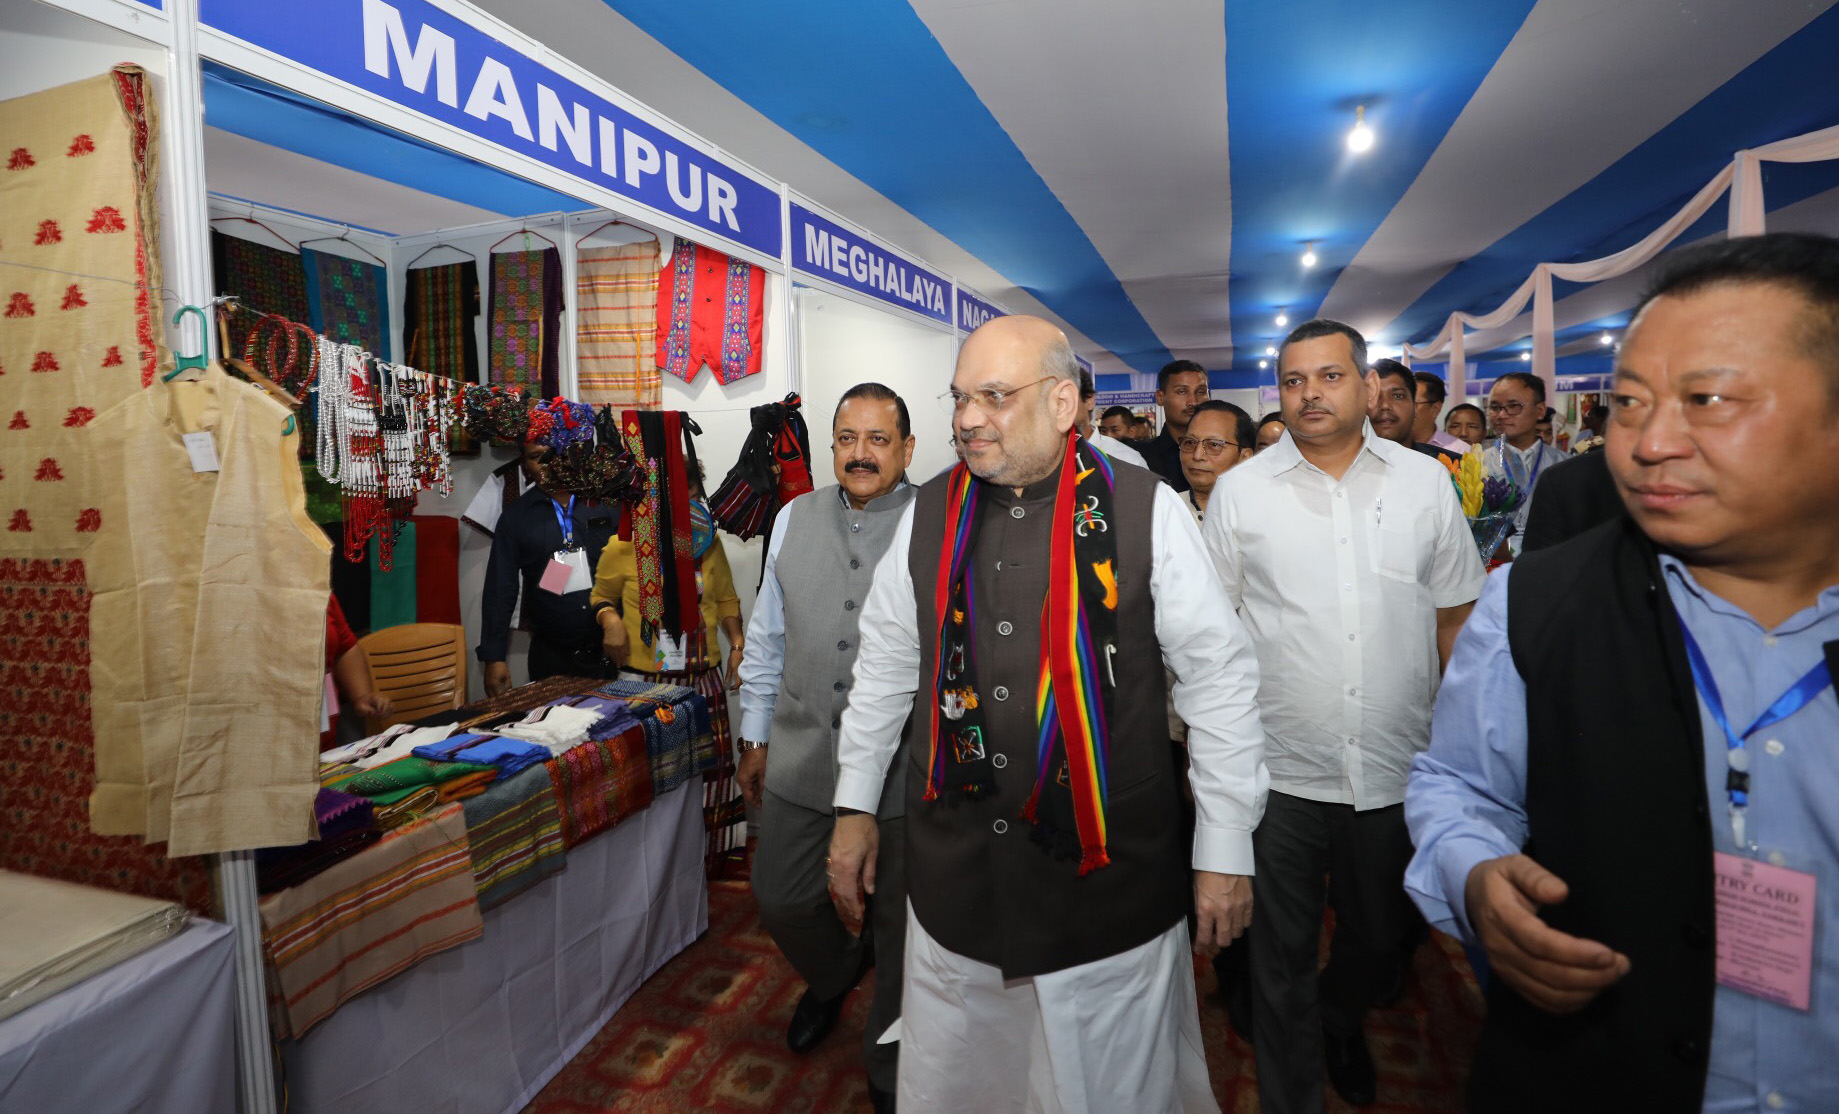 The Union Home Minister, Shri Amit Shah reviewing the North East Handloom and Handicraft Exhibition, in Aizawl, Mizoram on October 05, 2019. The Minister of State for Development of North Eastern Region (I/C), Prime Ministers Office, Personnel, Public Grievances & Pensions, Atomic Energy and Space, Dr. Jitendra Singh is also seen.